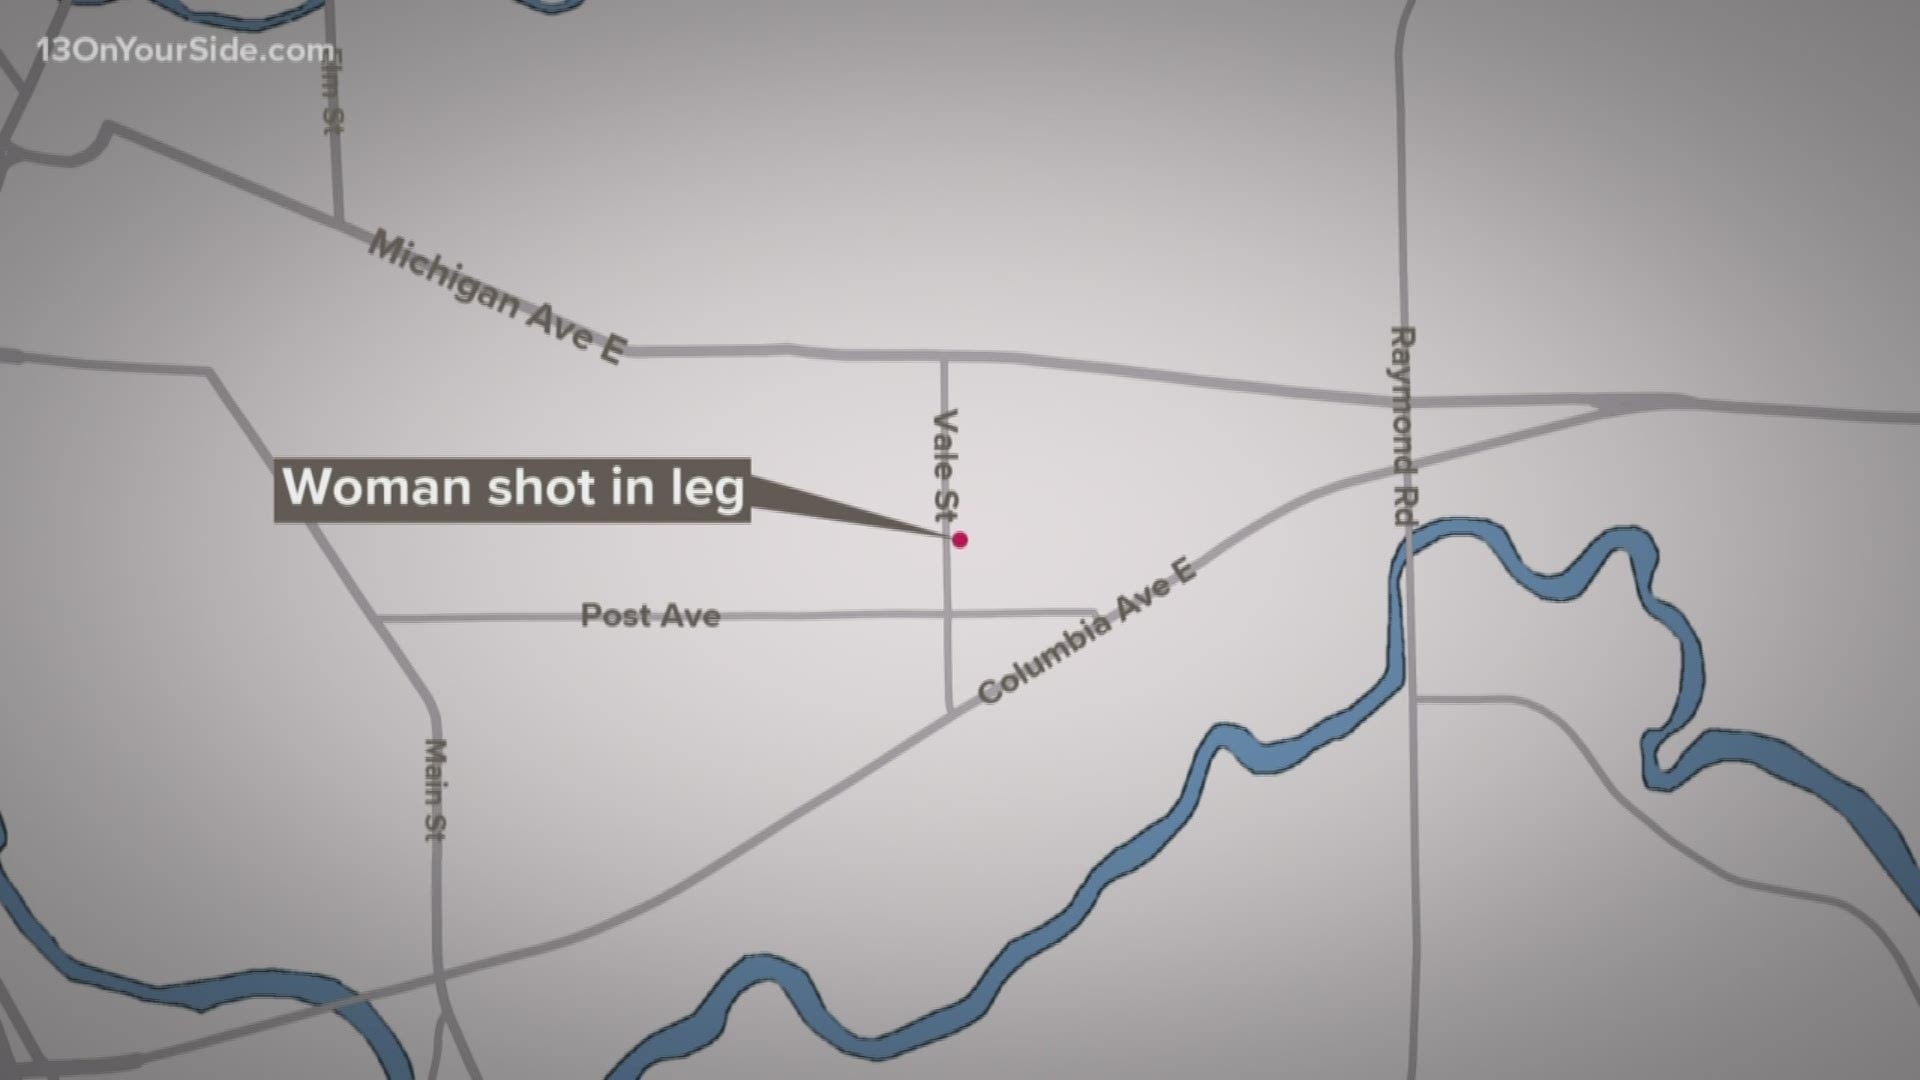 A woman was hit by gunfire Friday night after an argument broke out at a party. An uninvited man began arguing with another man and then shot several rounds. She was struck in the leg, a non-life-threatening injury.